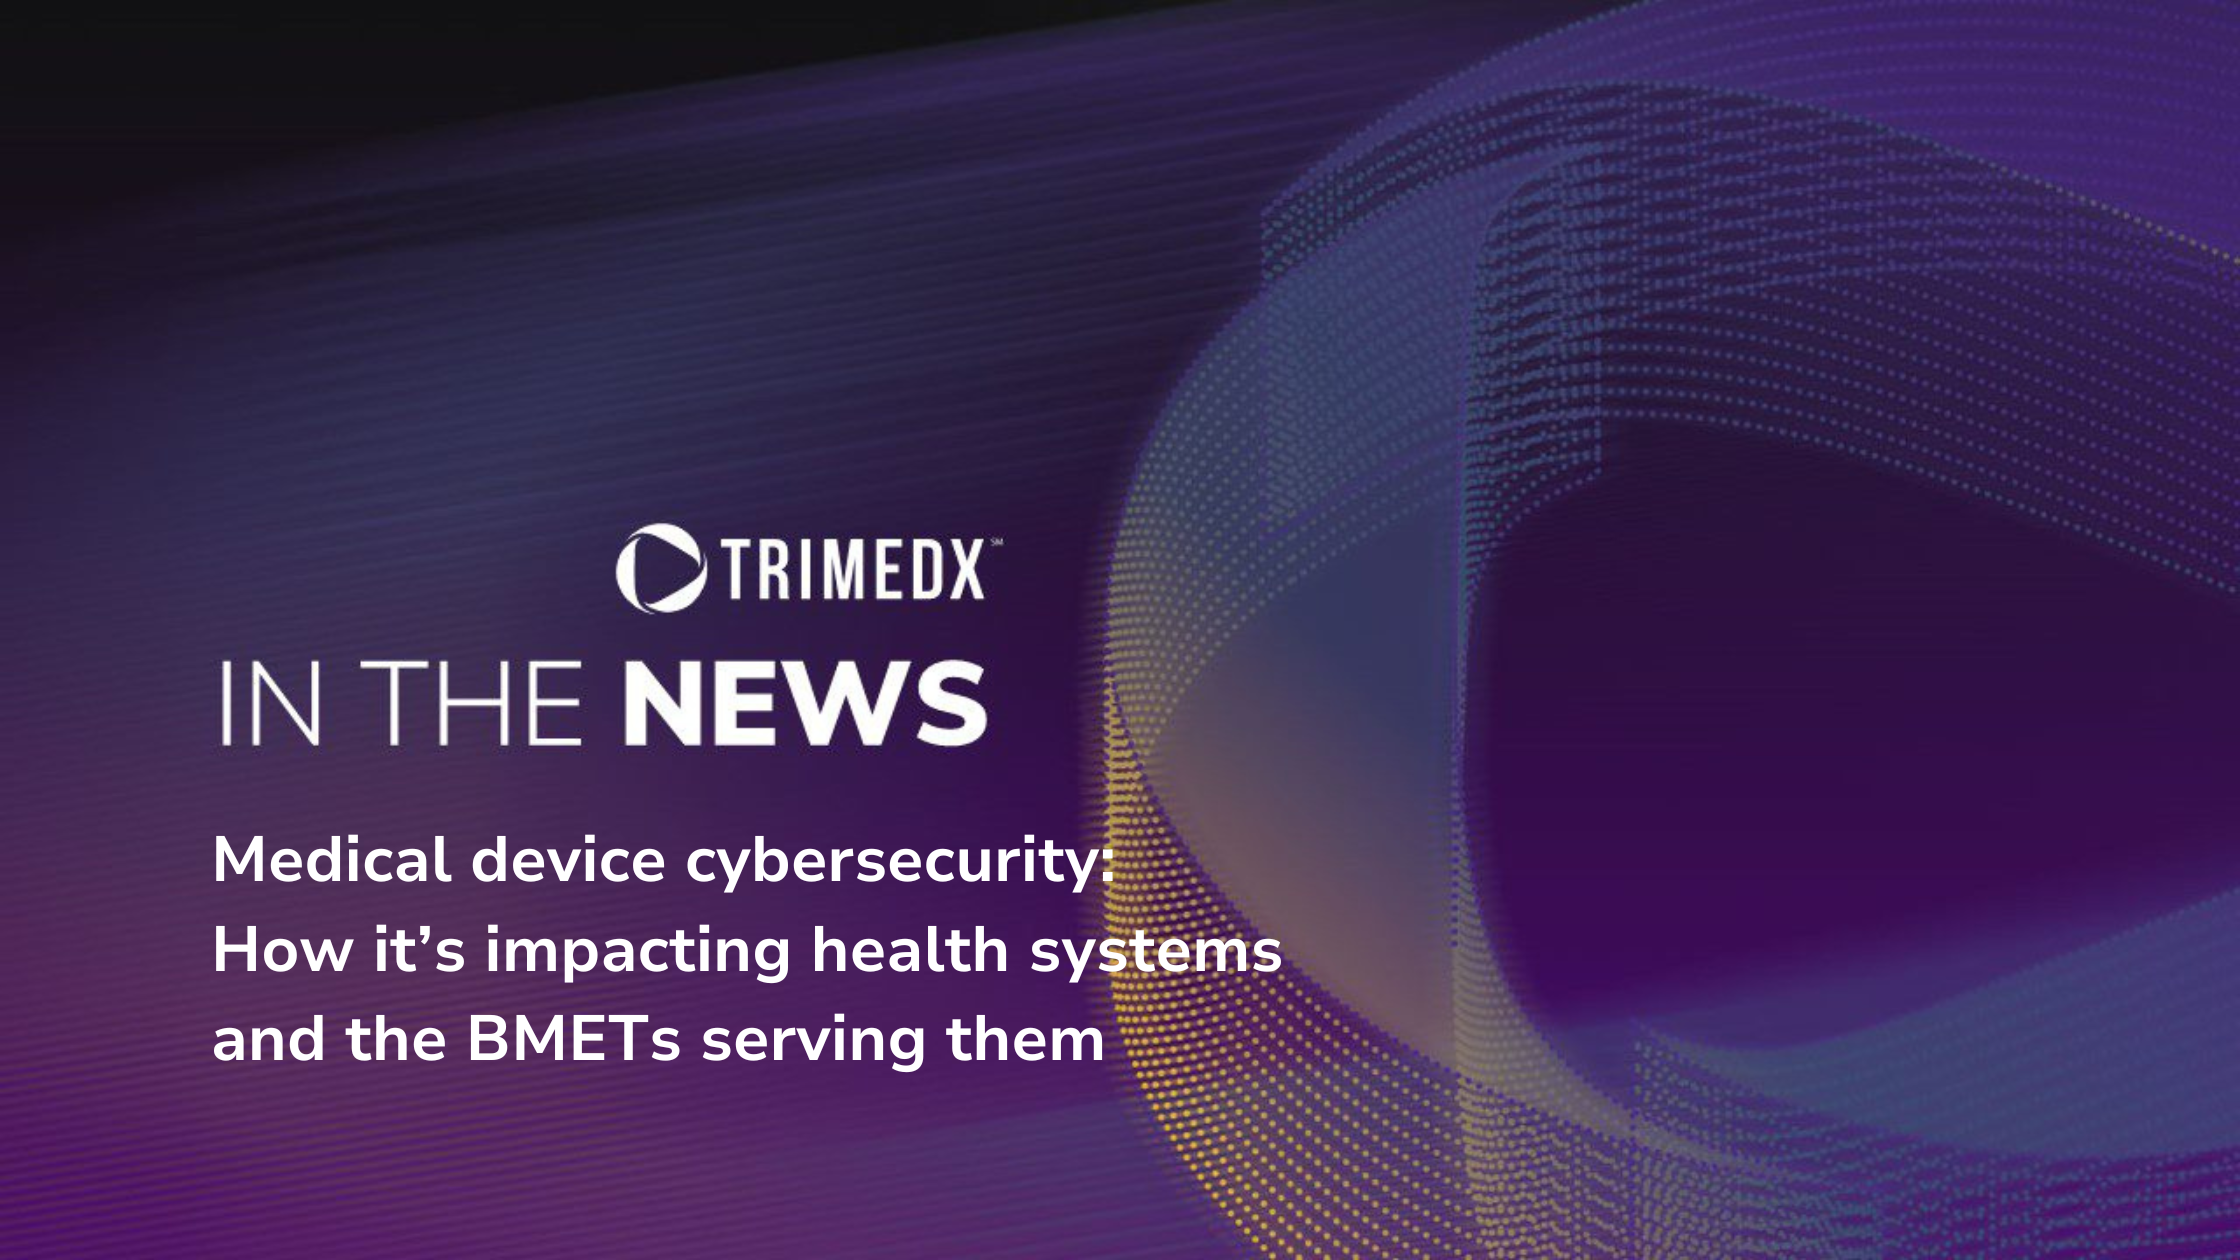 Medical device cybersecurity: How it’s impacting health systems and the BMETs serving them